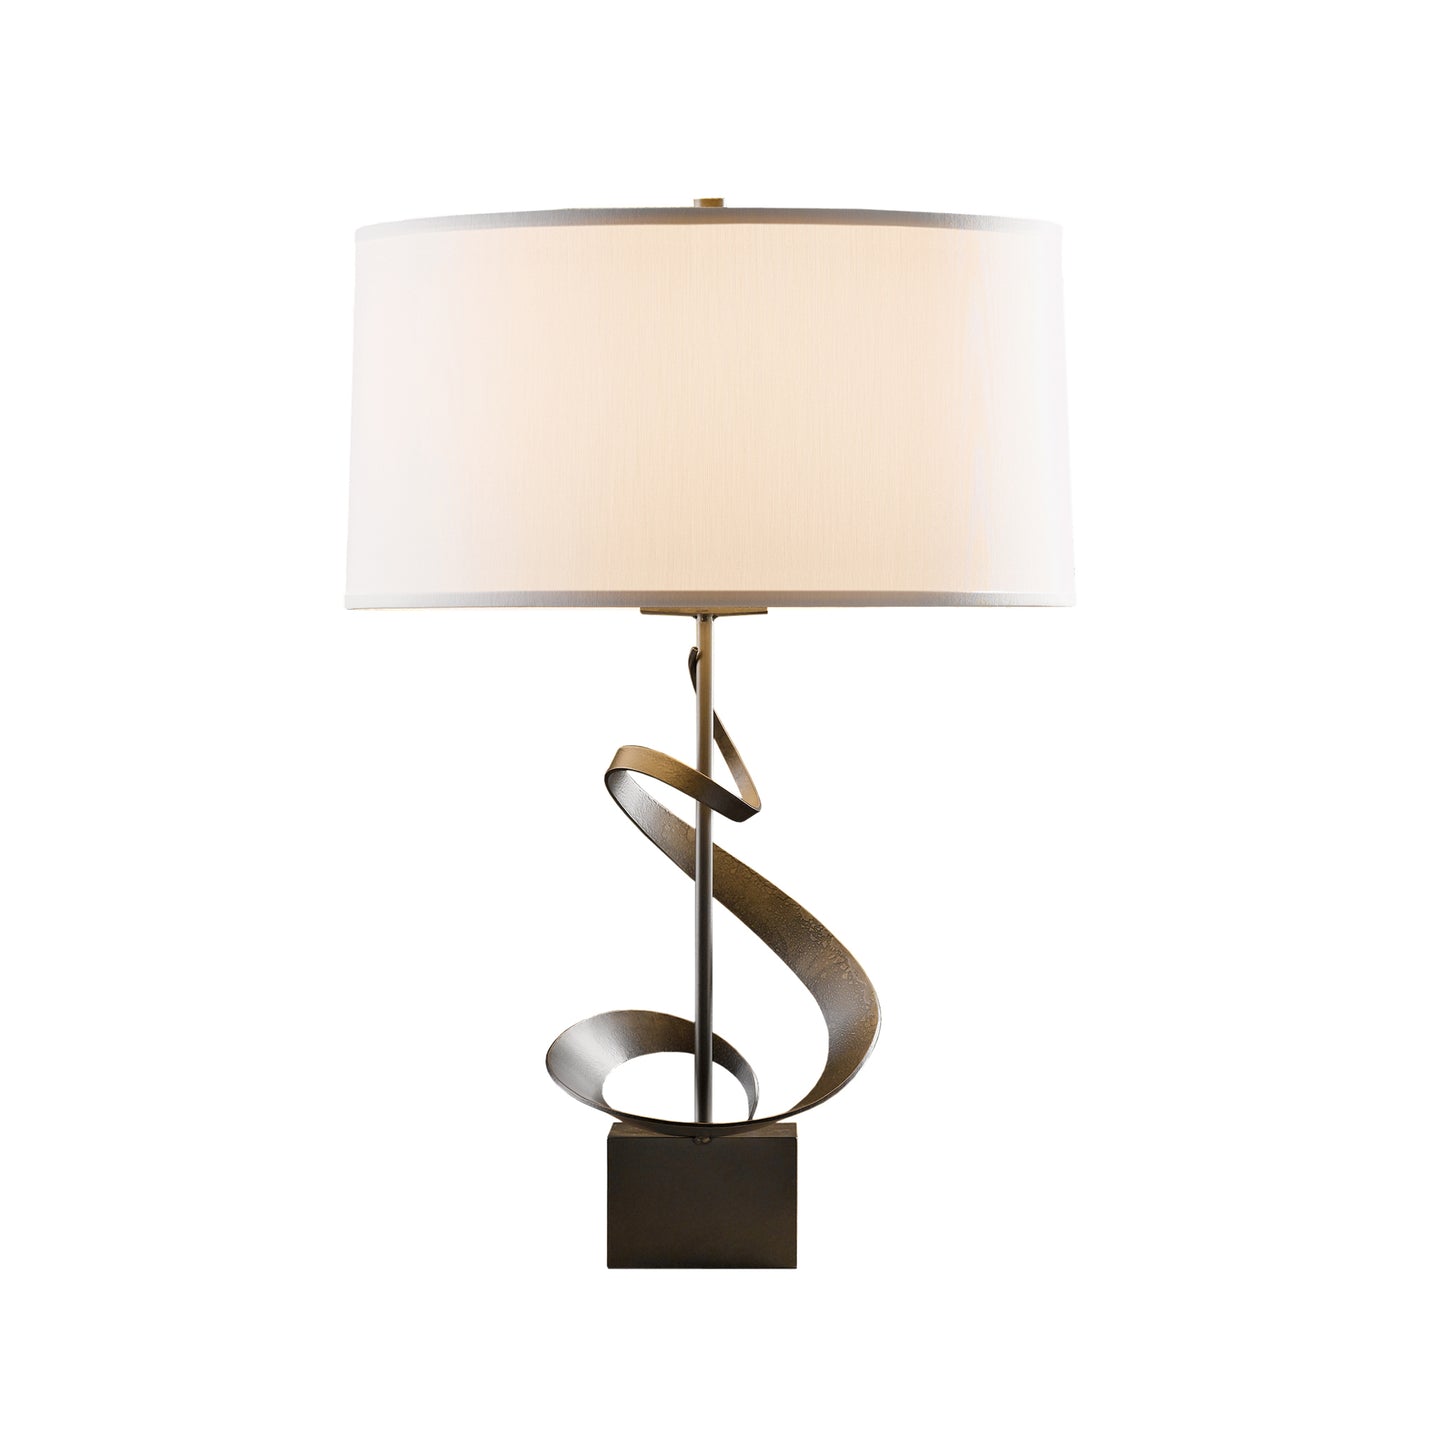 A Gallery Spiral Table Lamp, handcrafted in Vermont by Hubbardton Forge, with a metal base and a white shade.